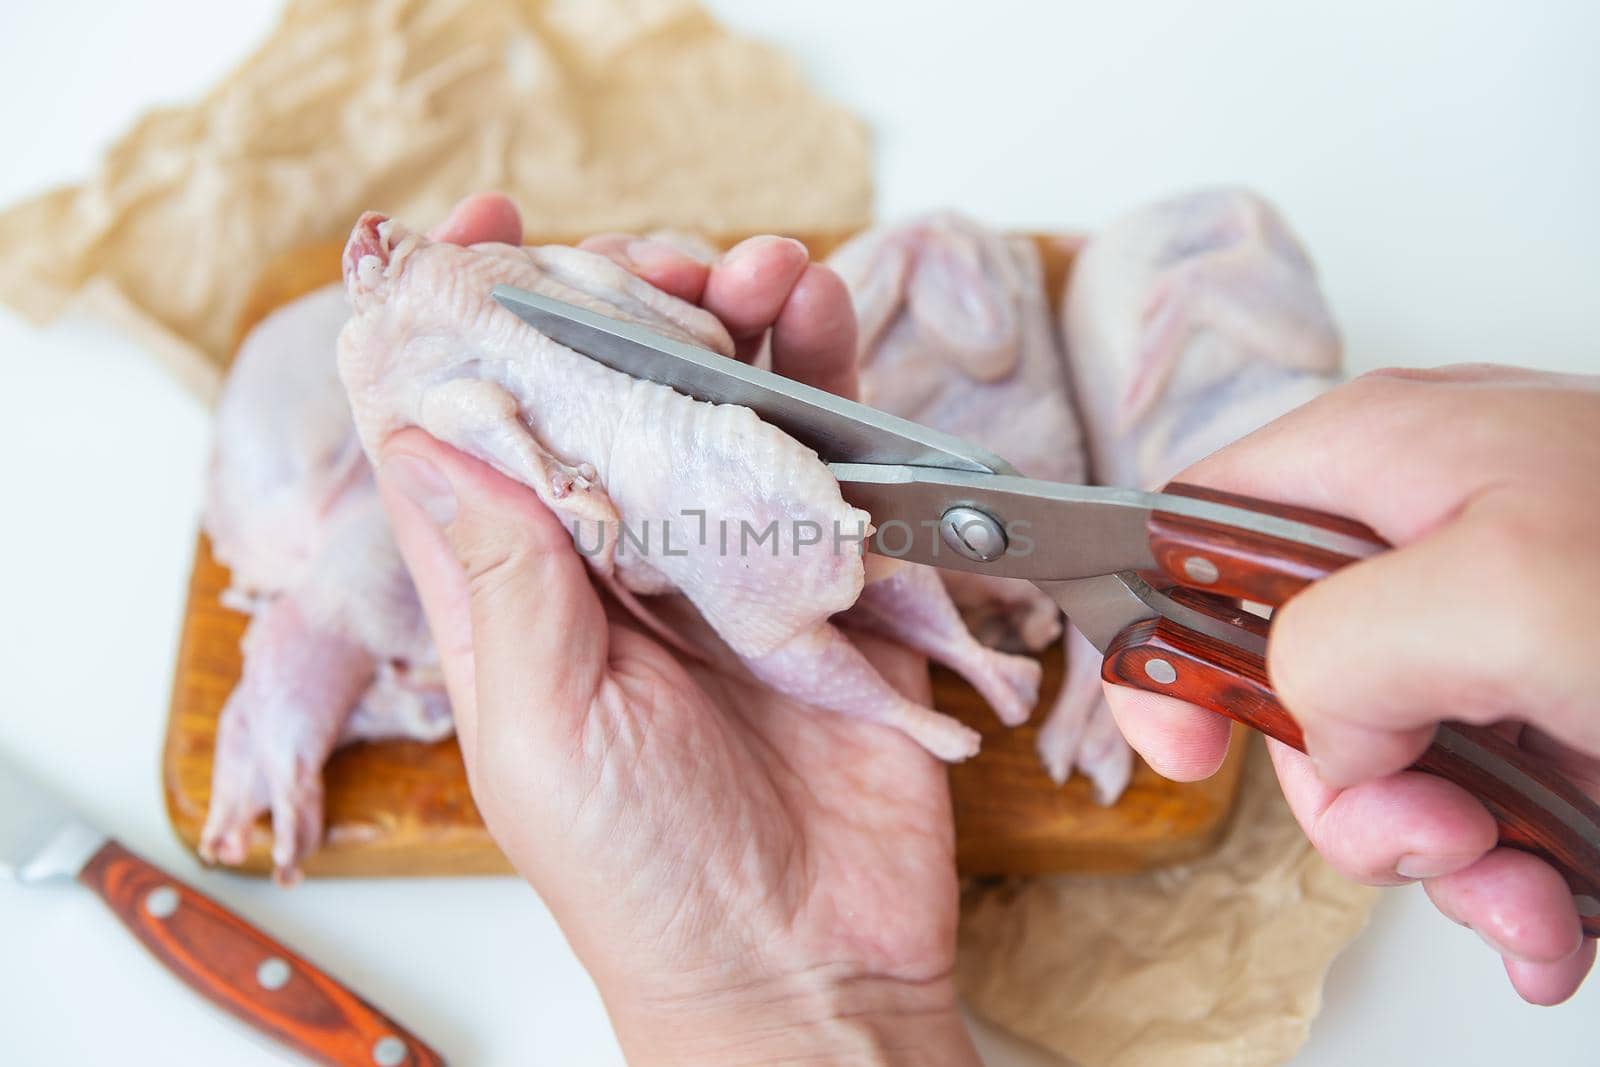 Raw quails lie on a wooden board. A man uses scissors to cut diet lean meat. by sfinks